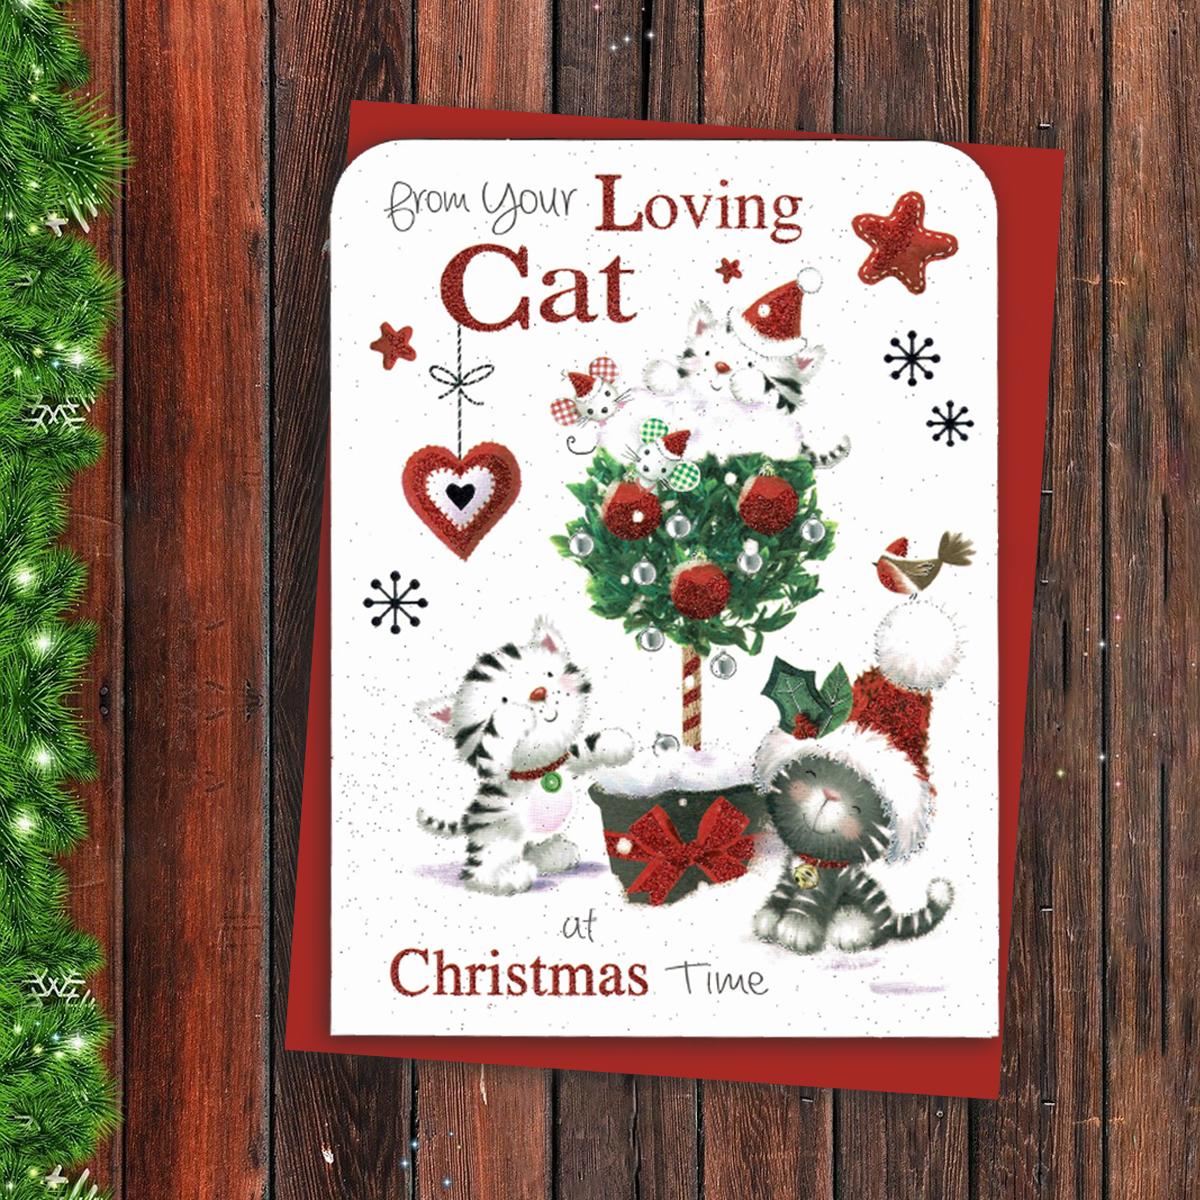 From The Cat Christmas Card Alongside Its Red Envelope